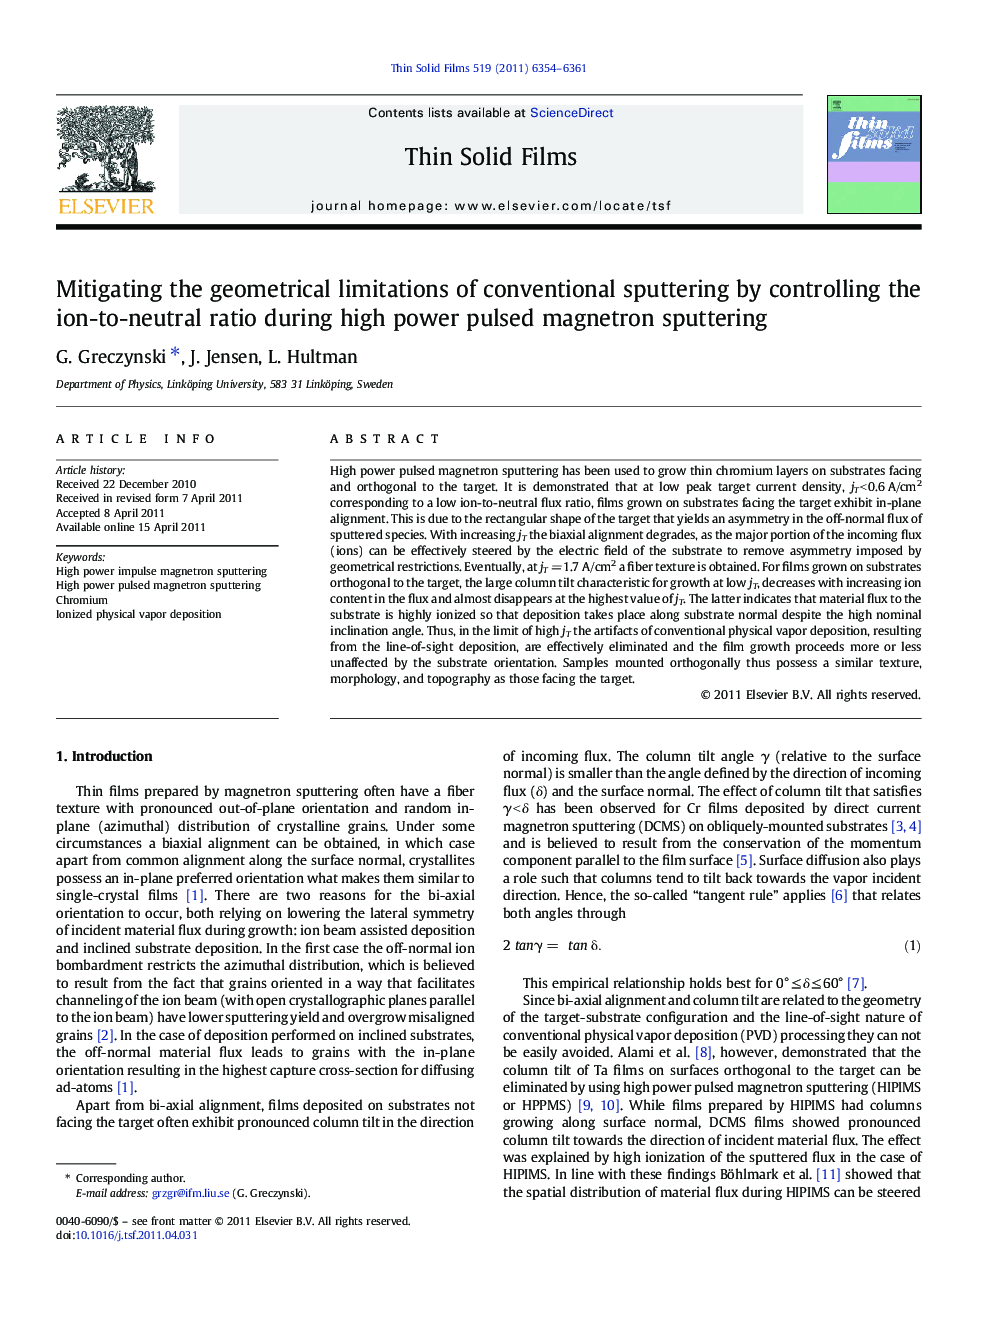 Mitigating the geometrical limitations of conventional sputtering by controlling the ion-to-neutral ratio during high power pulsed magnetron sputtering